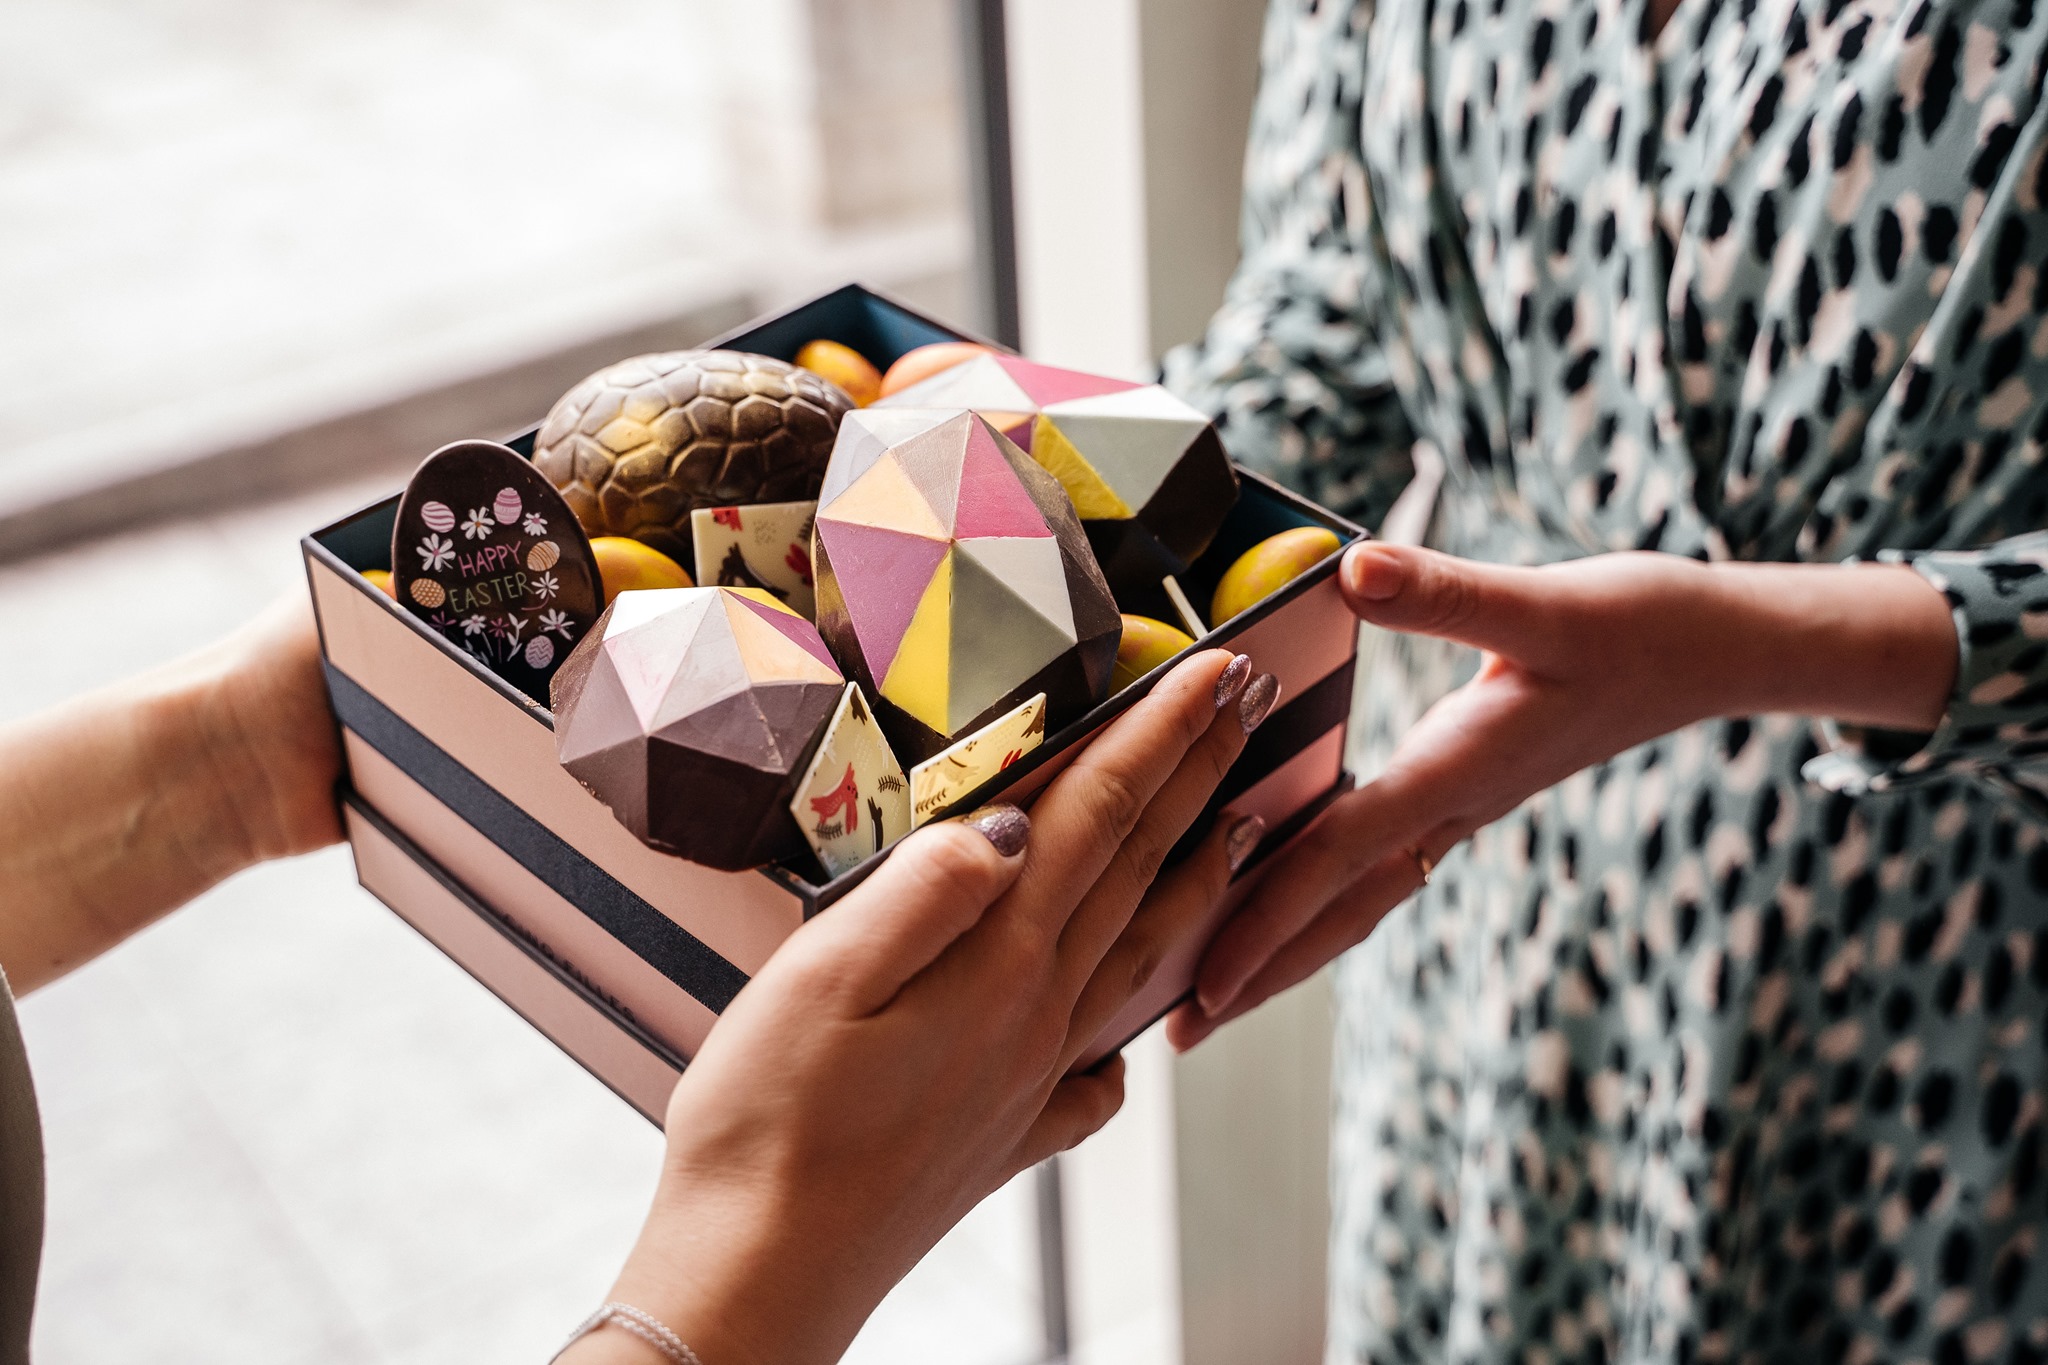 Easter Chocolate Offer From The Ritz-Carlton, Budapest